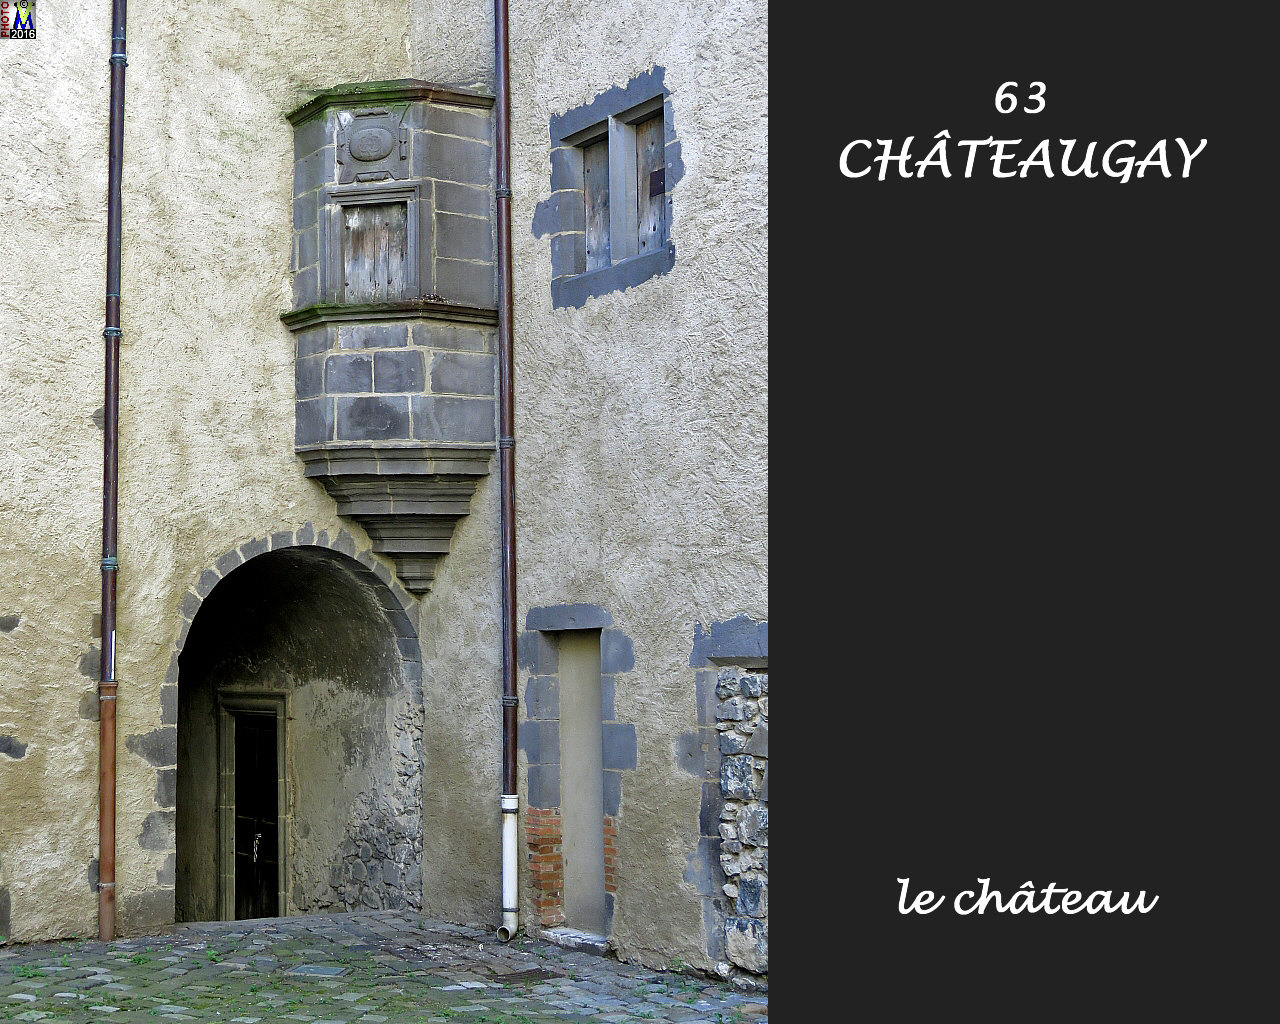 63CHATEAUGAY_chateau_116.jpg